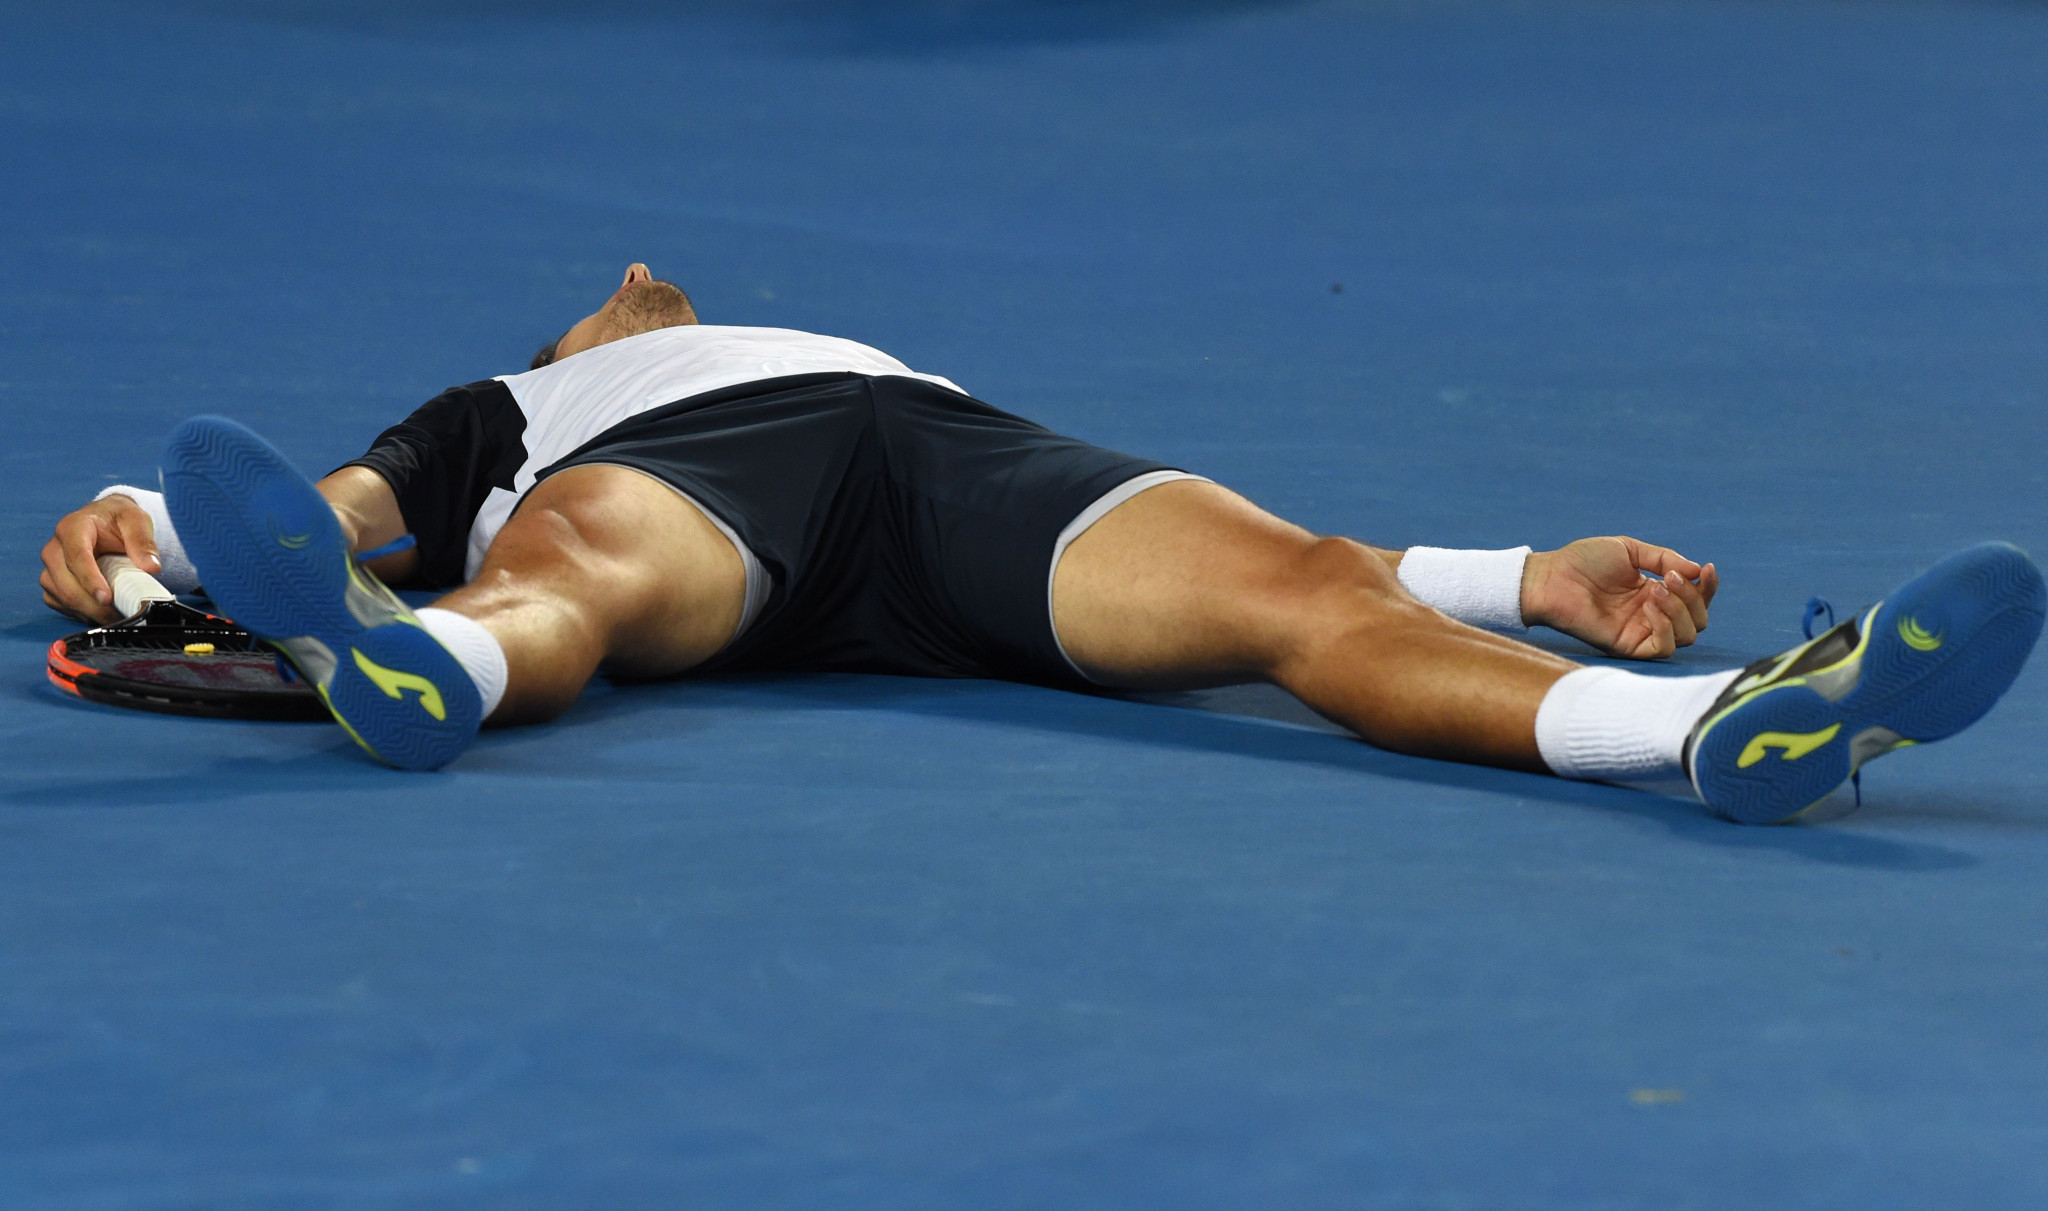 Pablo Carreno Busta showed exhaustion during the five set match with Nishikori ©Getty Images